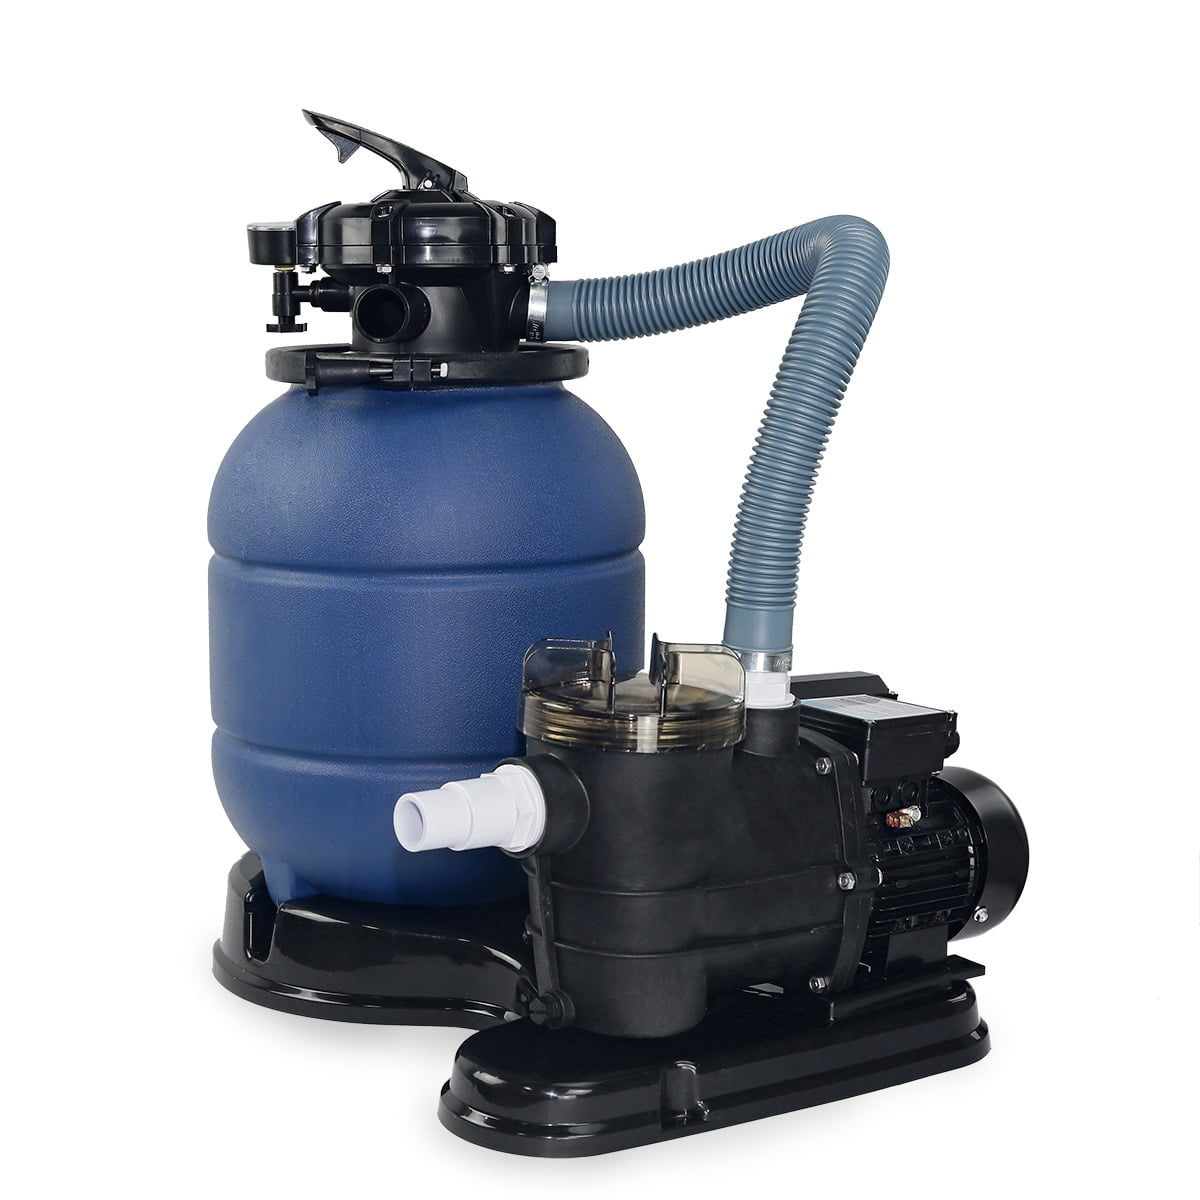 ARKSEN 2820GPH 13 Sand Filter for Above Ground Swimming Pool Pump 10000GAL Stand 4-Way Valve 1/2 HP Pool Pump 